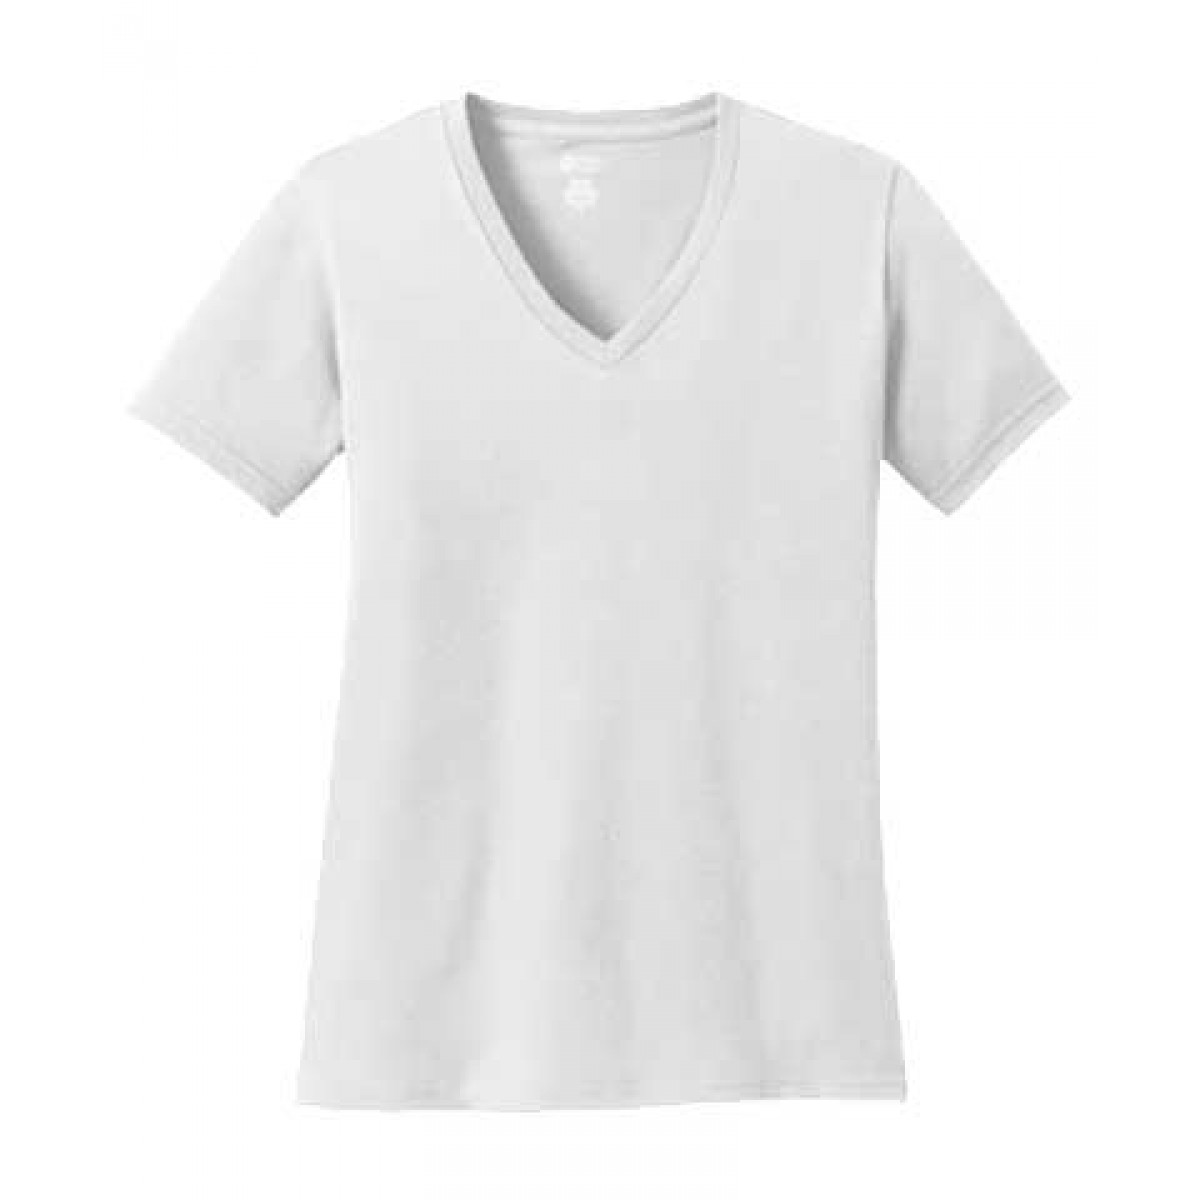 Ladies V-Neck Tee - Click for More Colors-White-4XL